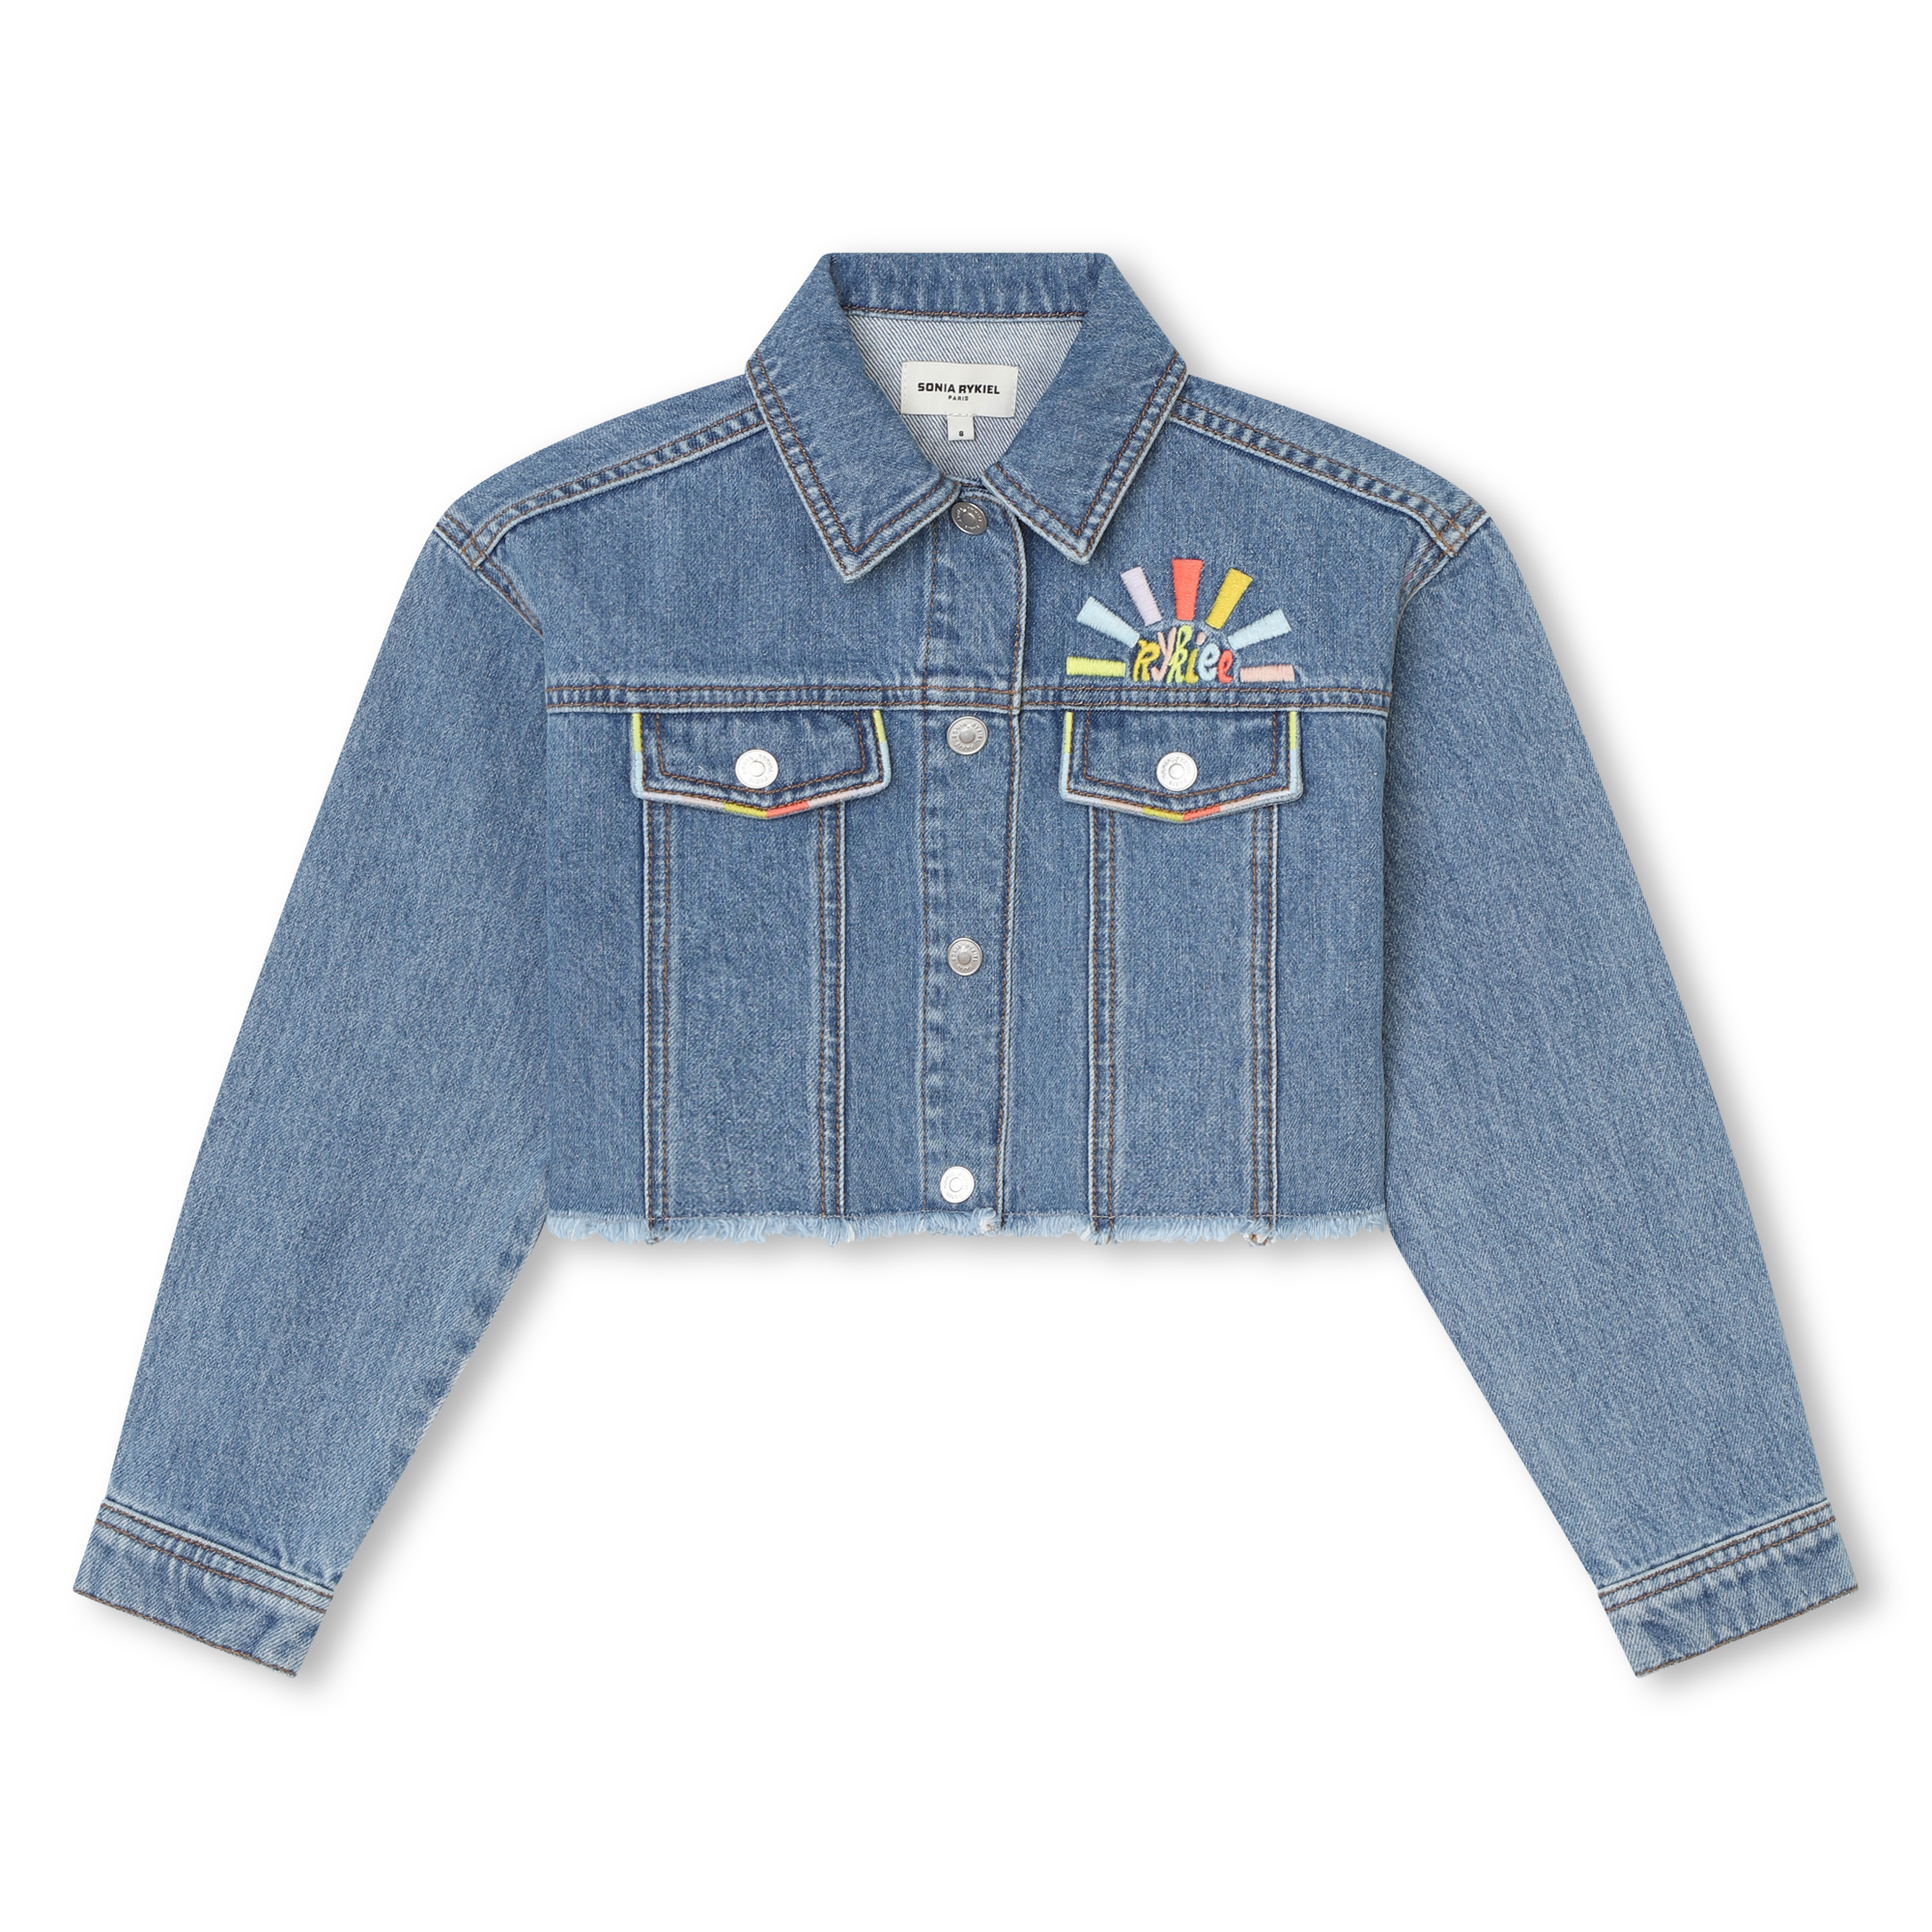 Embroidered jean jacket SONIA RYKIEL for GIRL